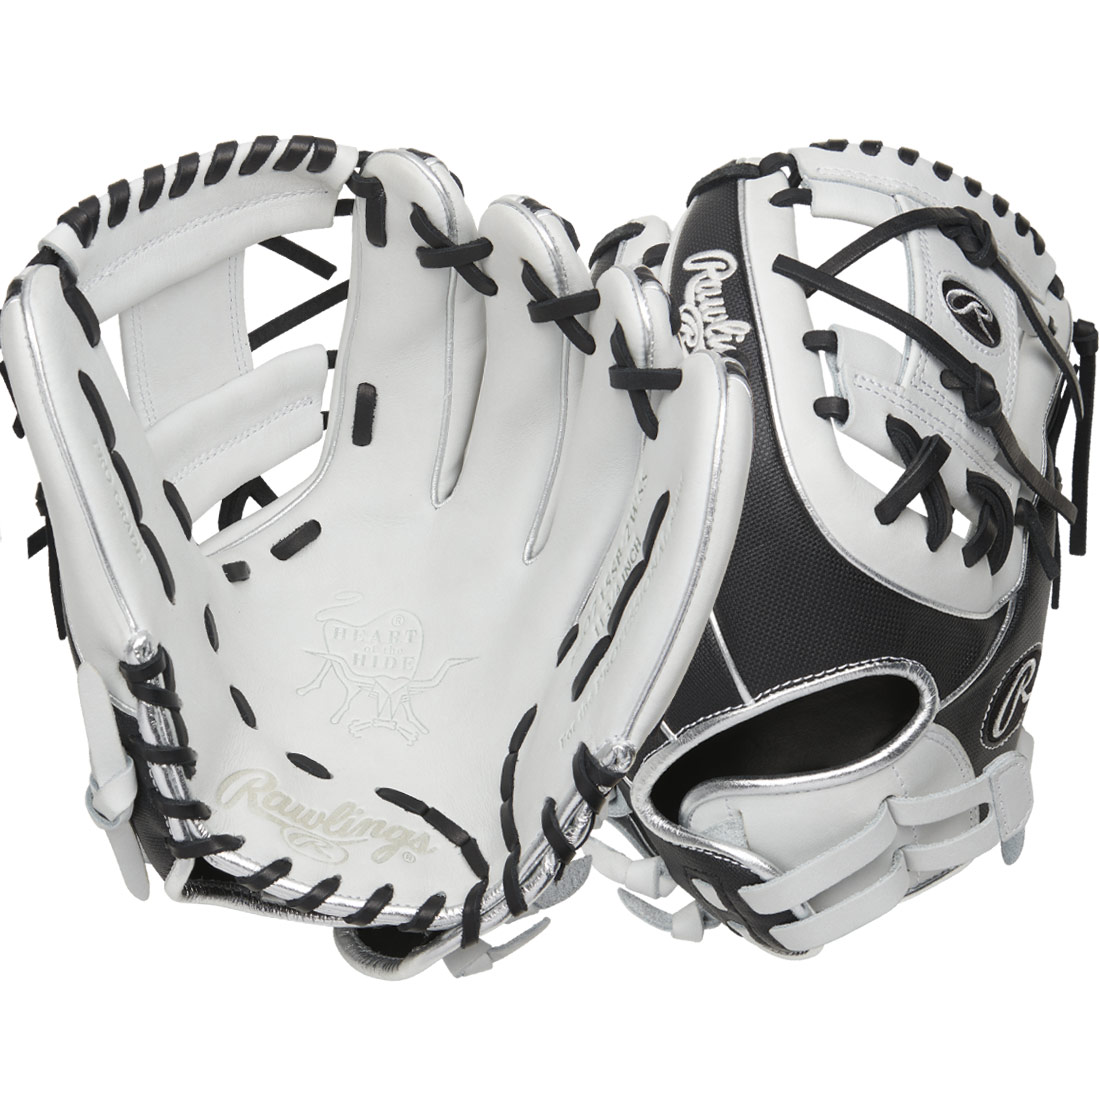 Rawlings Heart of the Hide Fastpitch Softball Glove 11.75\" PRO715SB-2WSS